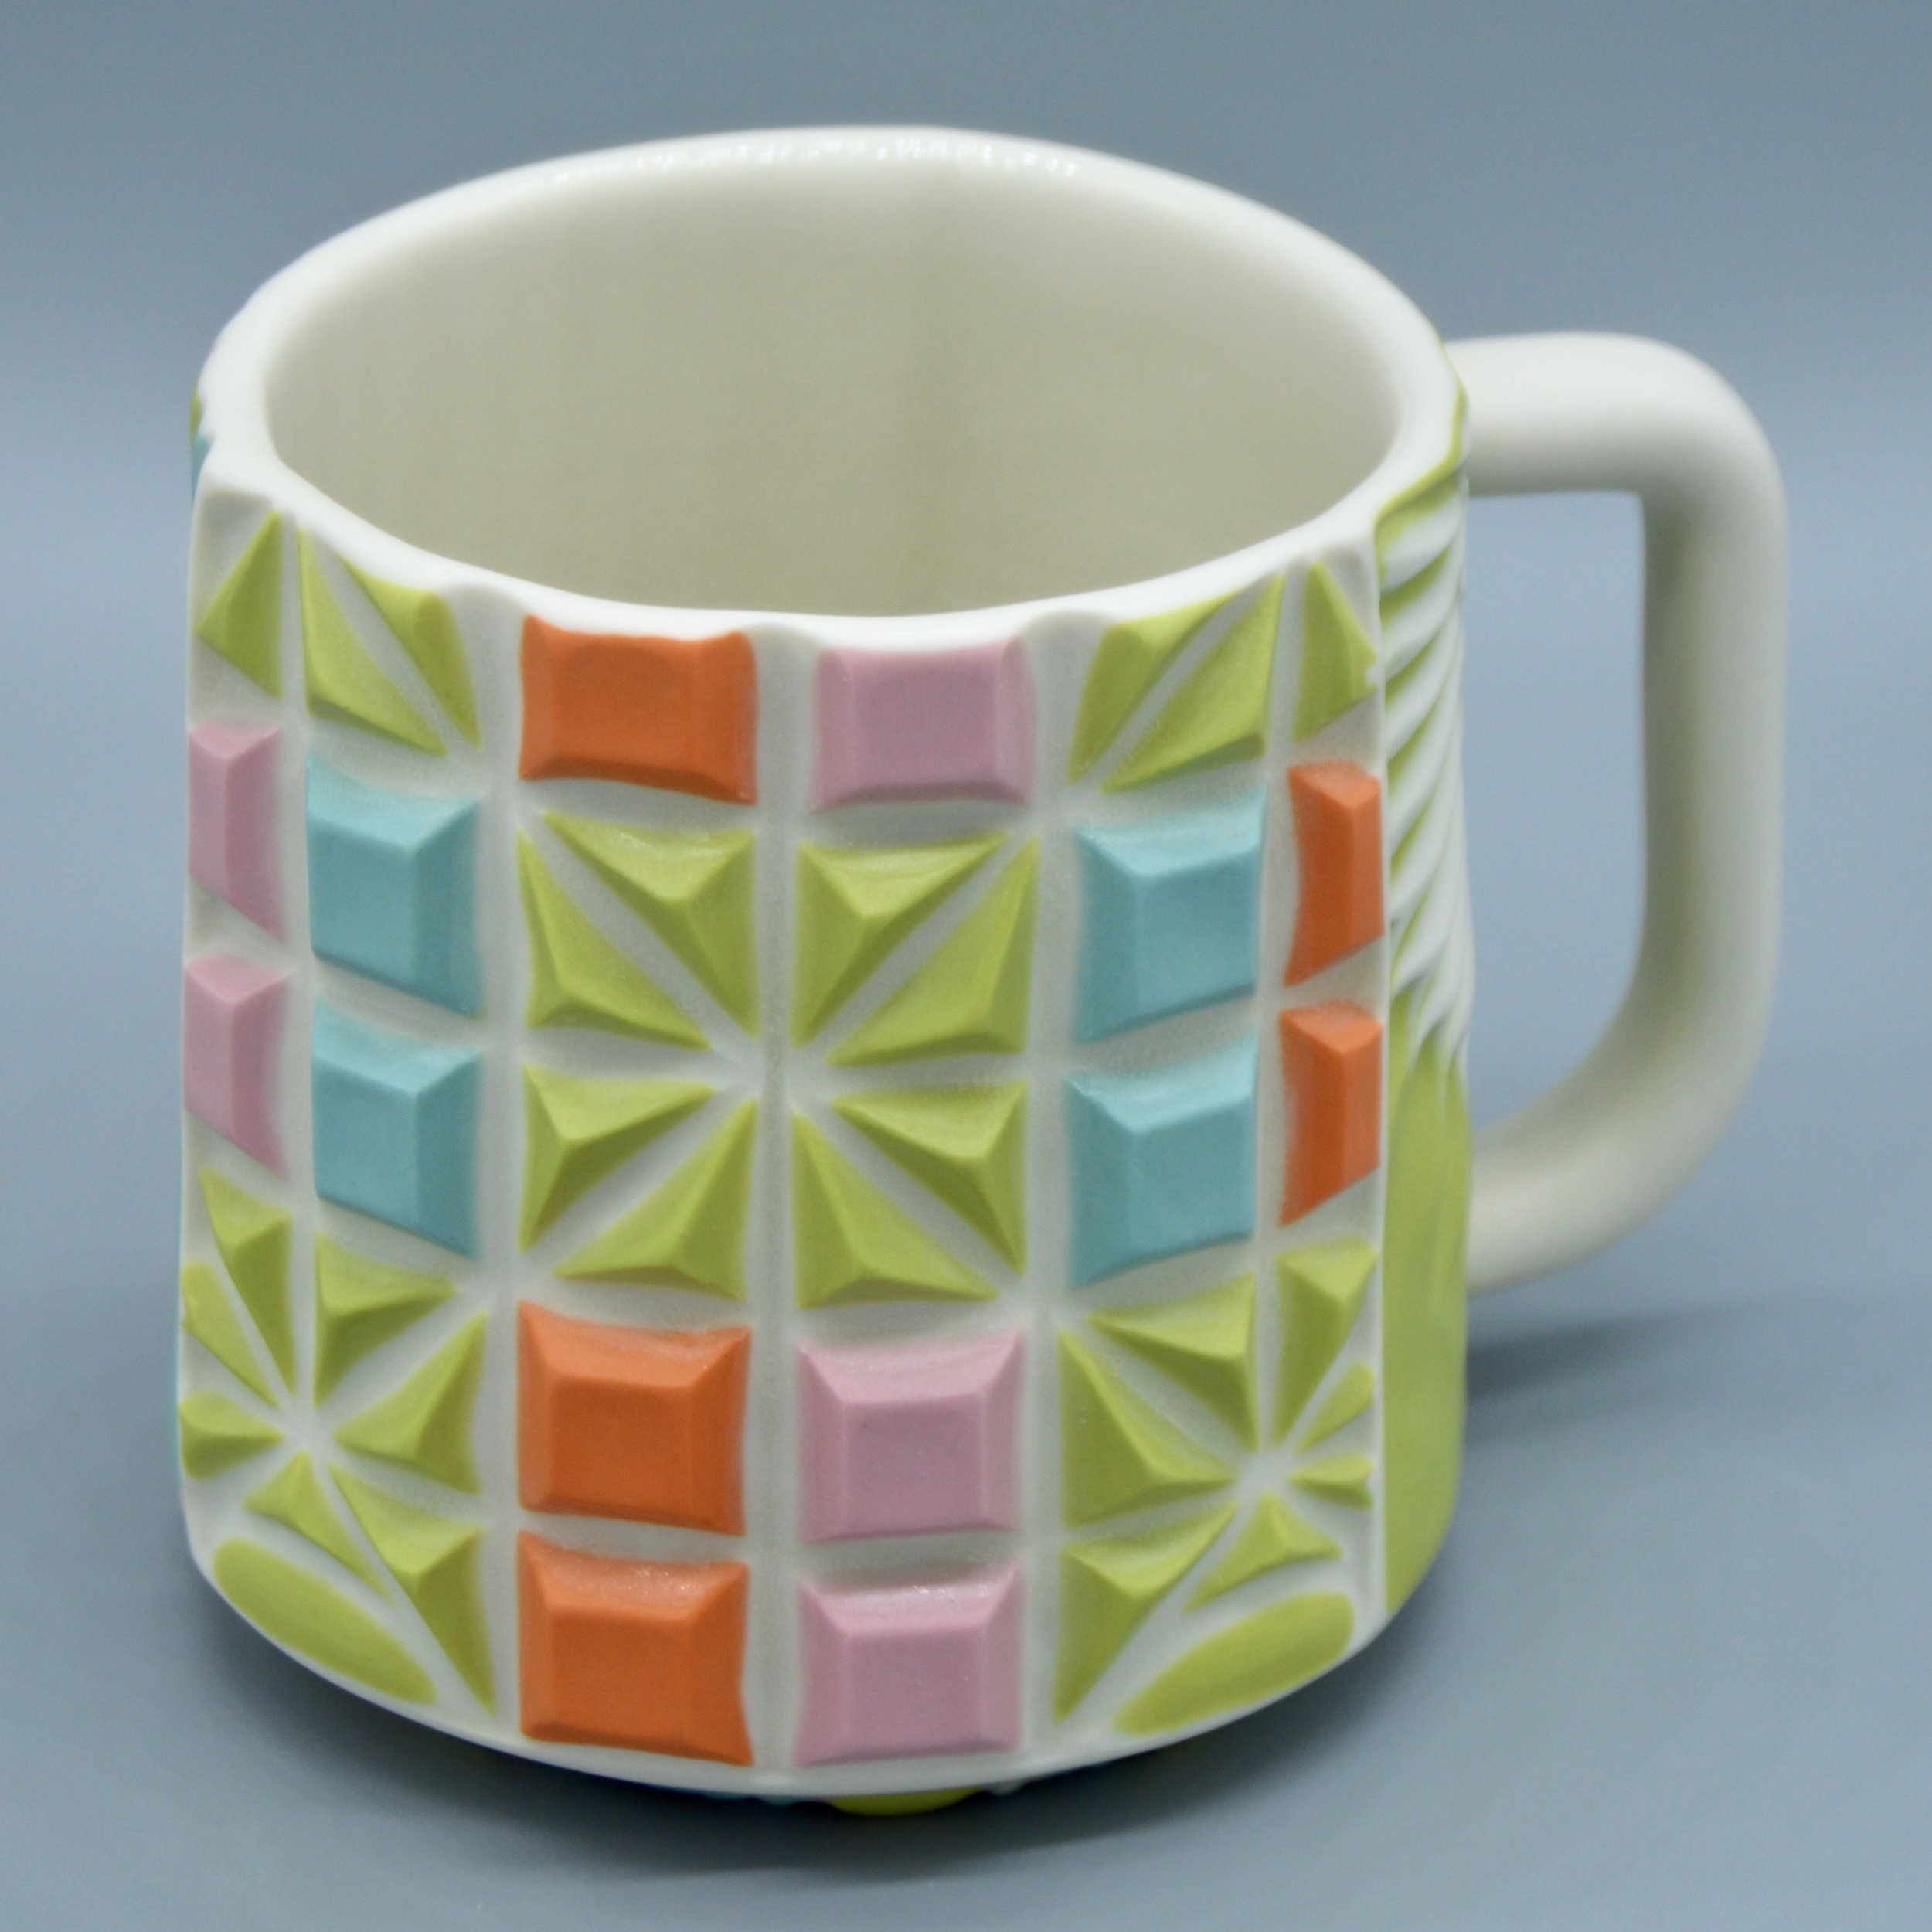 Blocks in Chartreuse, Pink, Orange, Turquoise